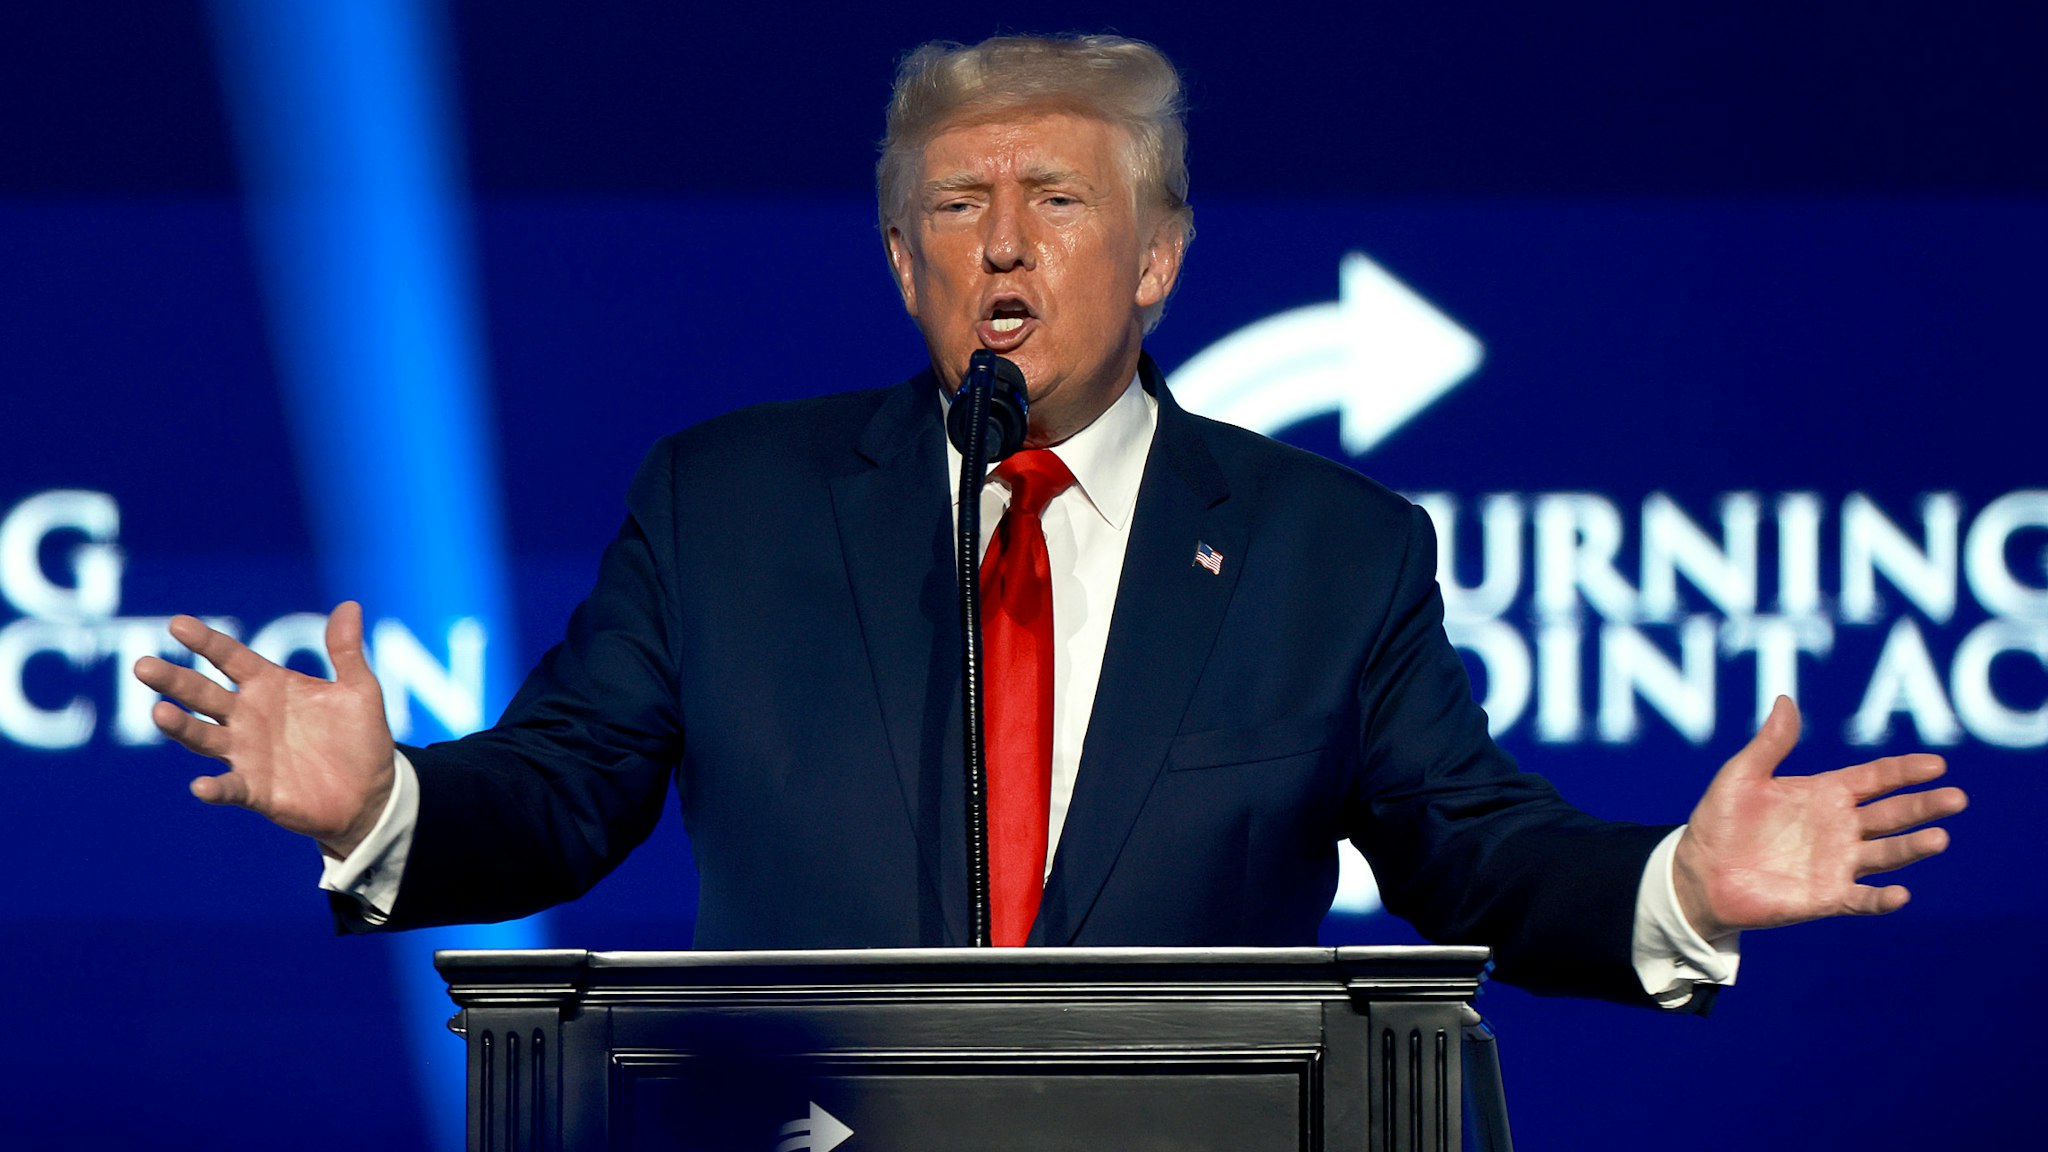 TAMPA, FLORIDA - JULY 23: Former U.S. President Donald Trump speaks during the Turning Point USA Student Action Summit held at the Tampa Convention Center on July 23, 2022 in Tampa, Florida. The event features student activism, leadership training, and a chance to participate in networking events with political leaders.